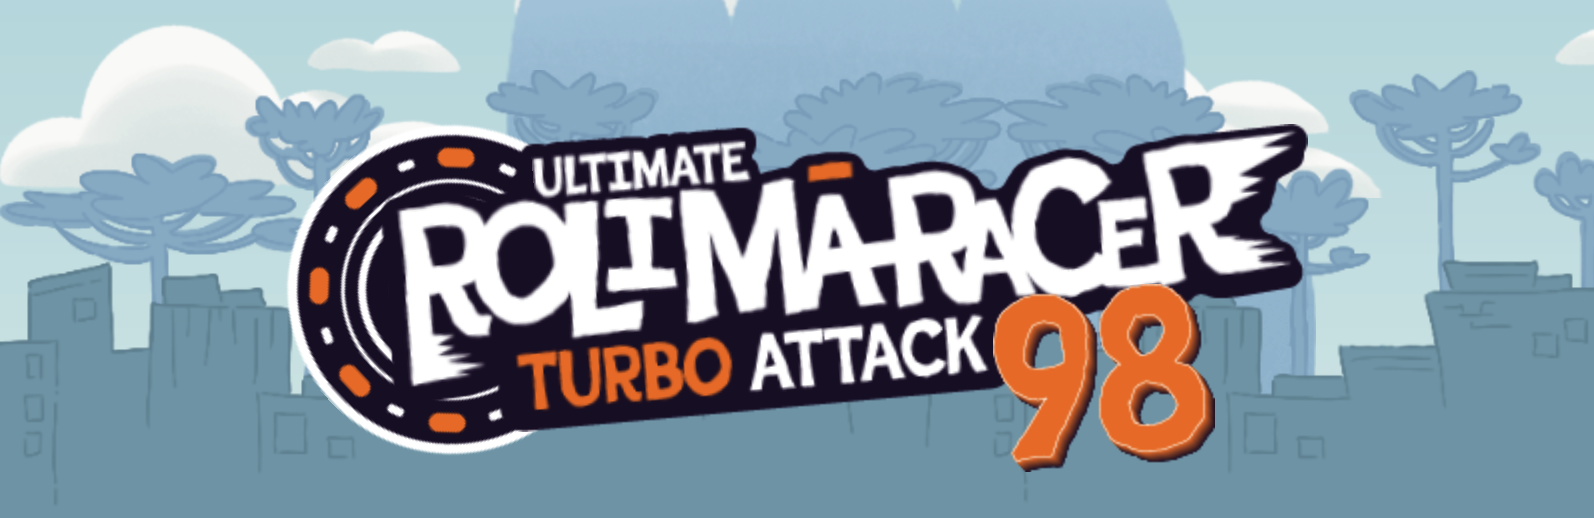 Ultimate Rolimã Racer Turbo Attack 98